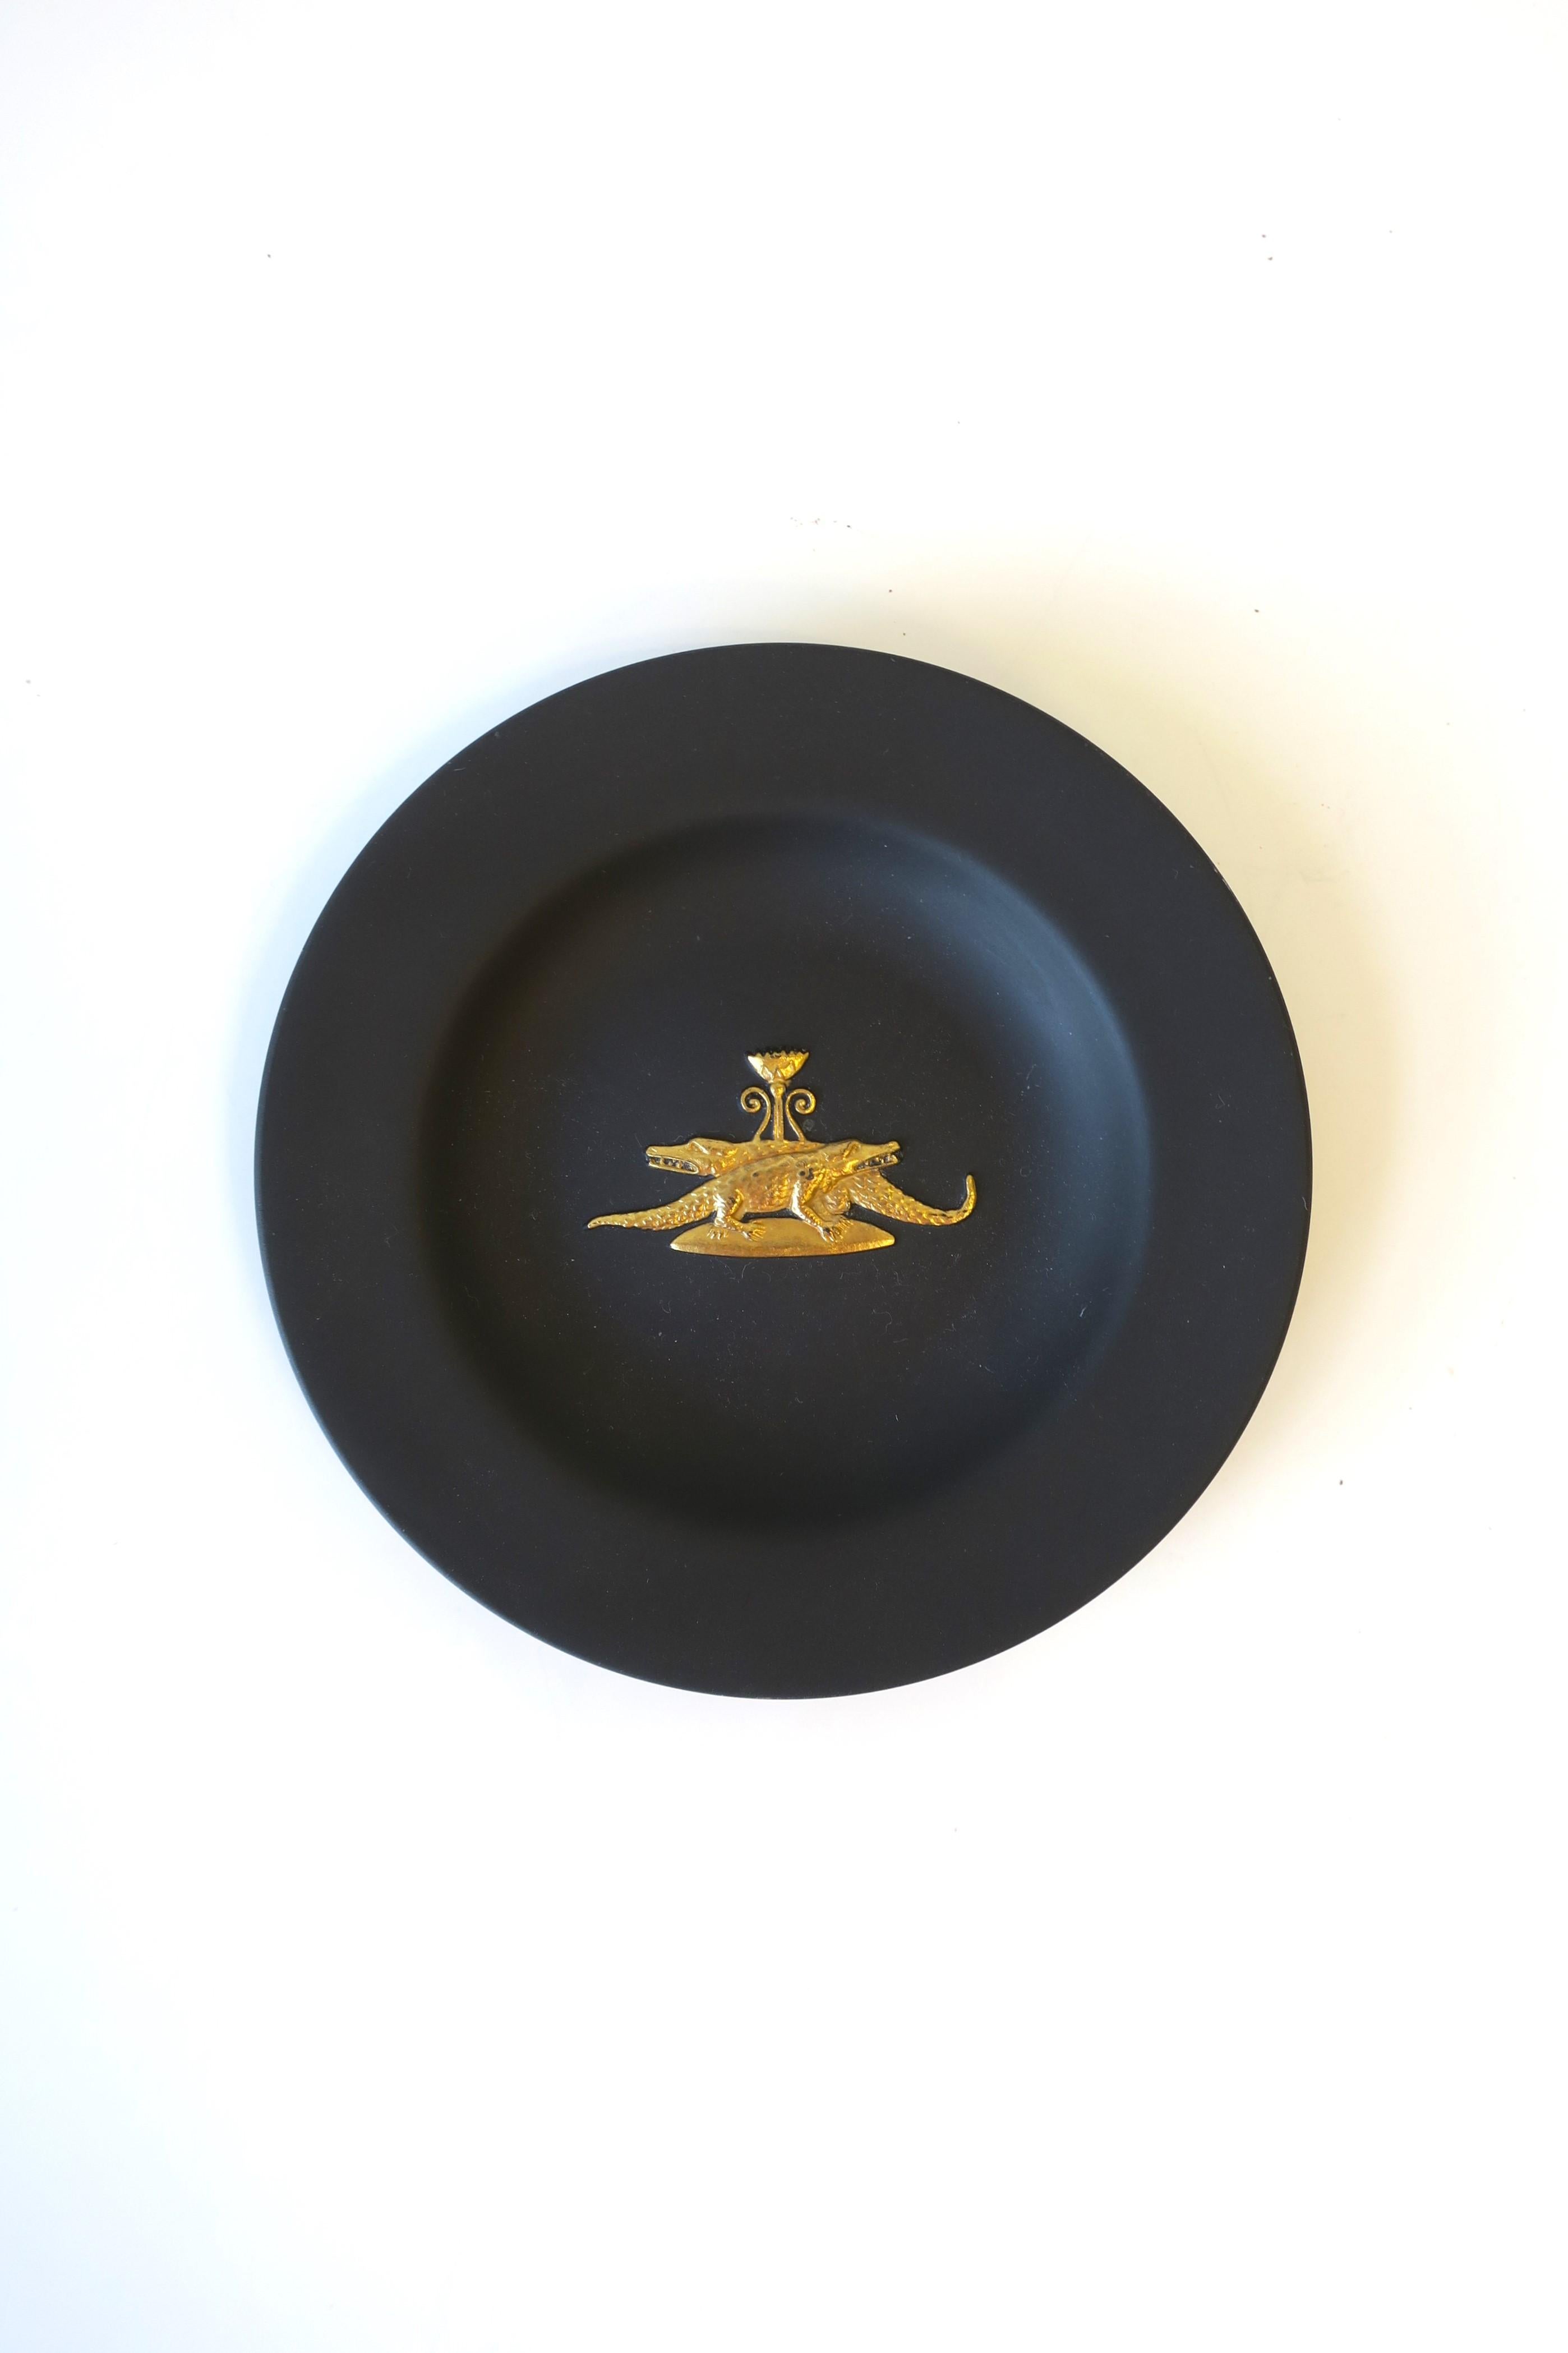 A rare English Jasperware matte black basalt and gold dish in the Neoclassical Revival style, by Wedgwood, England, circa late-20th century. A beautiful small piece with a gold raised relief of two alligators or crocodiles and an urn on a stand.